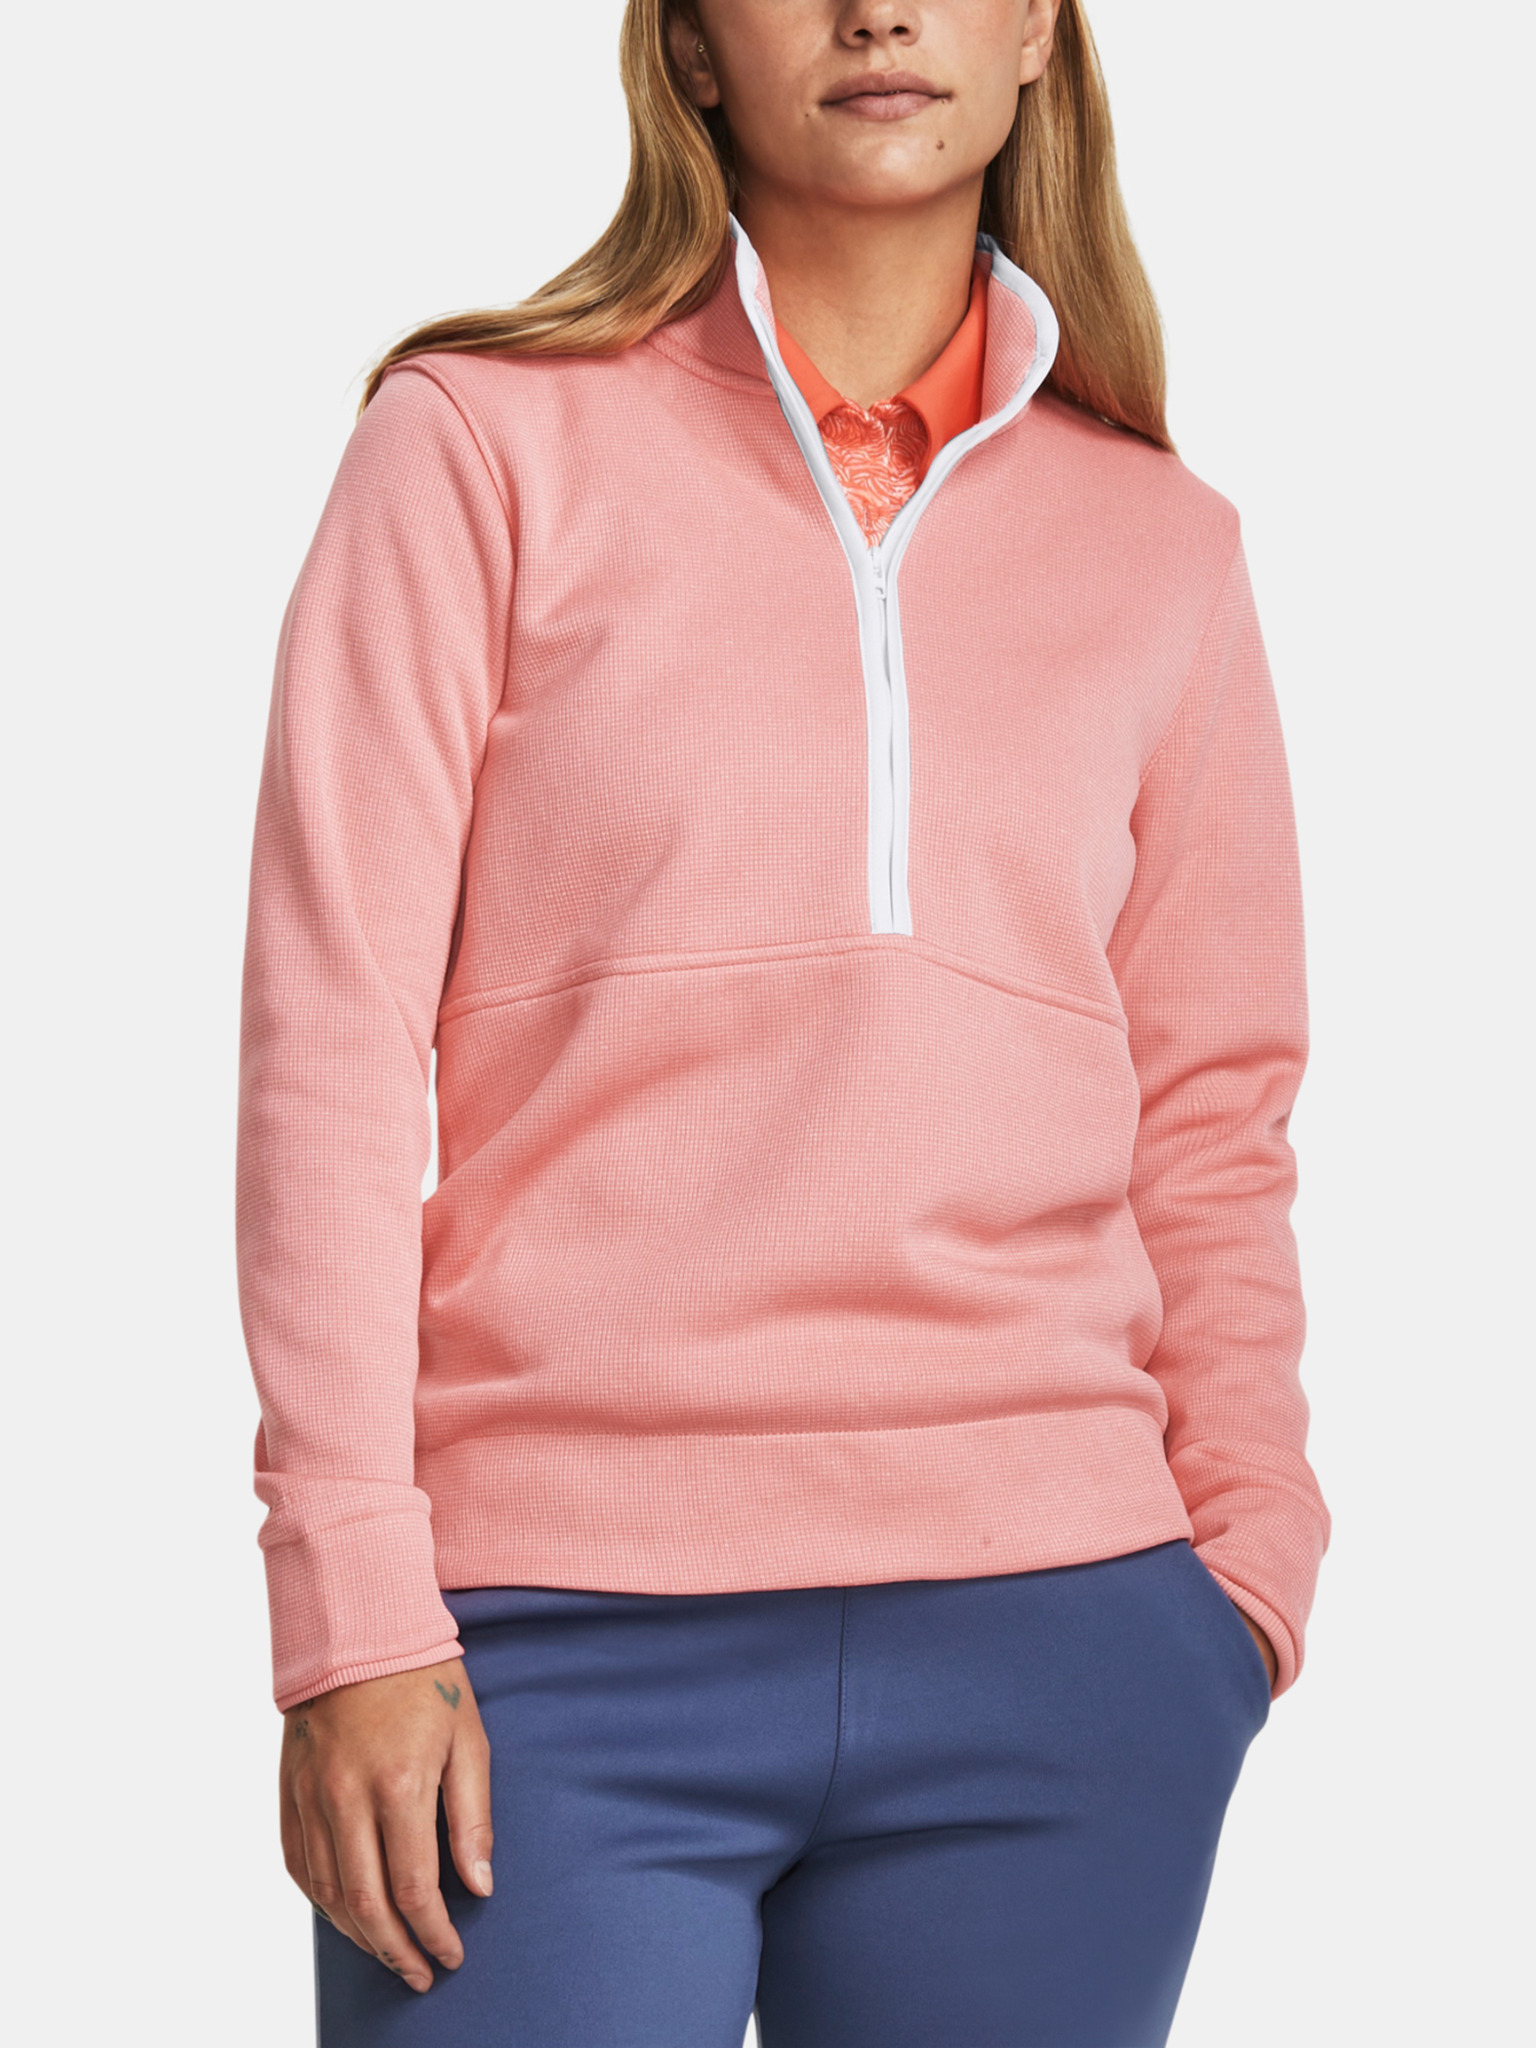 UNDER ARMOUR WOMENS PINK STORM 1 HOODIE SIZE XL